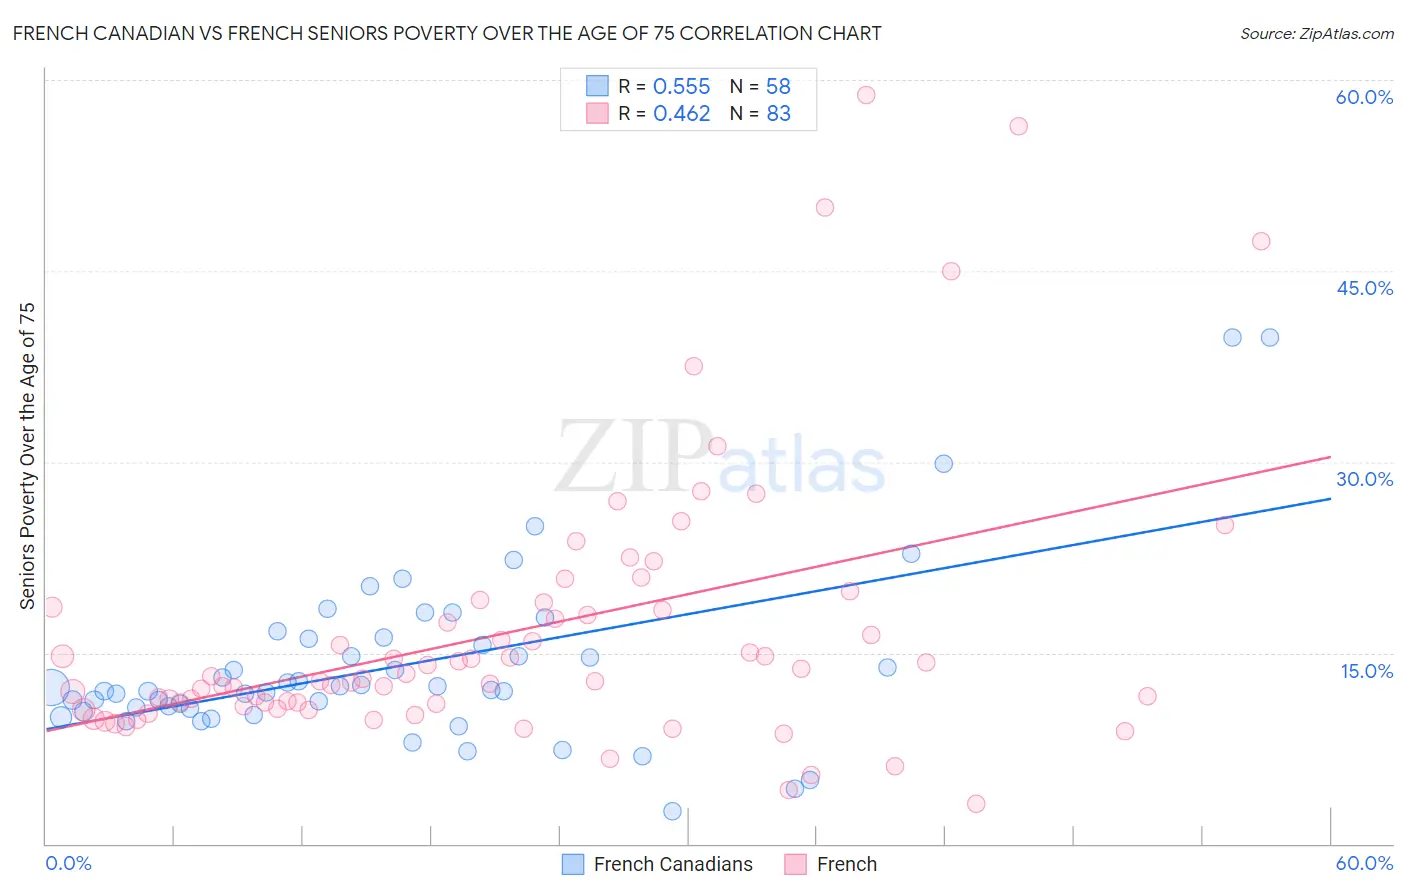 French Canadian vs French Seniors Poverty Over the Age of 75